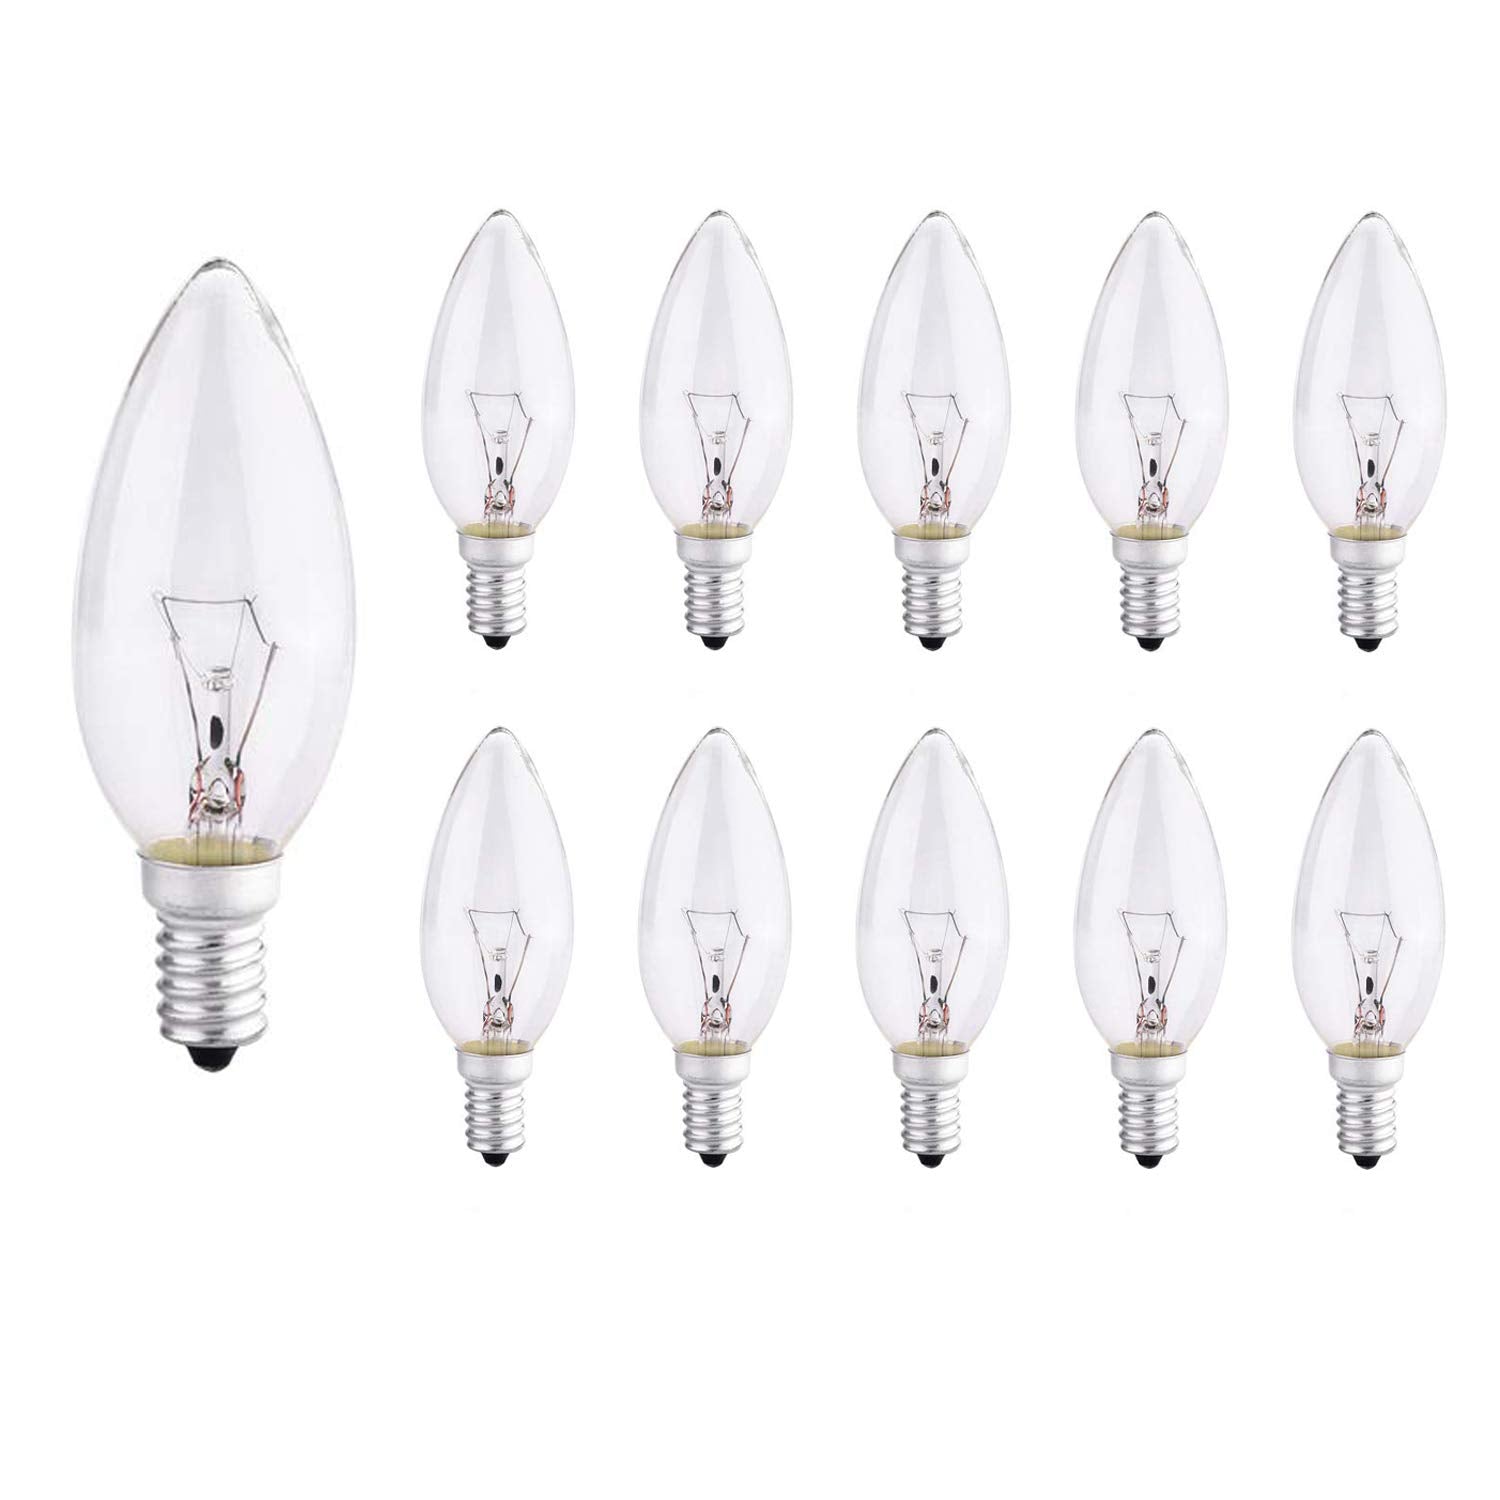 Litbulbs 10 Pack Edison Screw Candle Light Bulbs 40W Dimmable Clear Candle SES/E14 Small Screw Chandelier Bulbs 2700K Warm White, 410LM, 240V